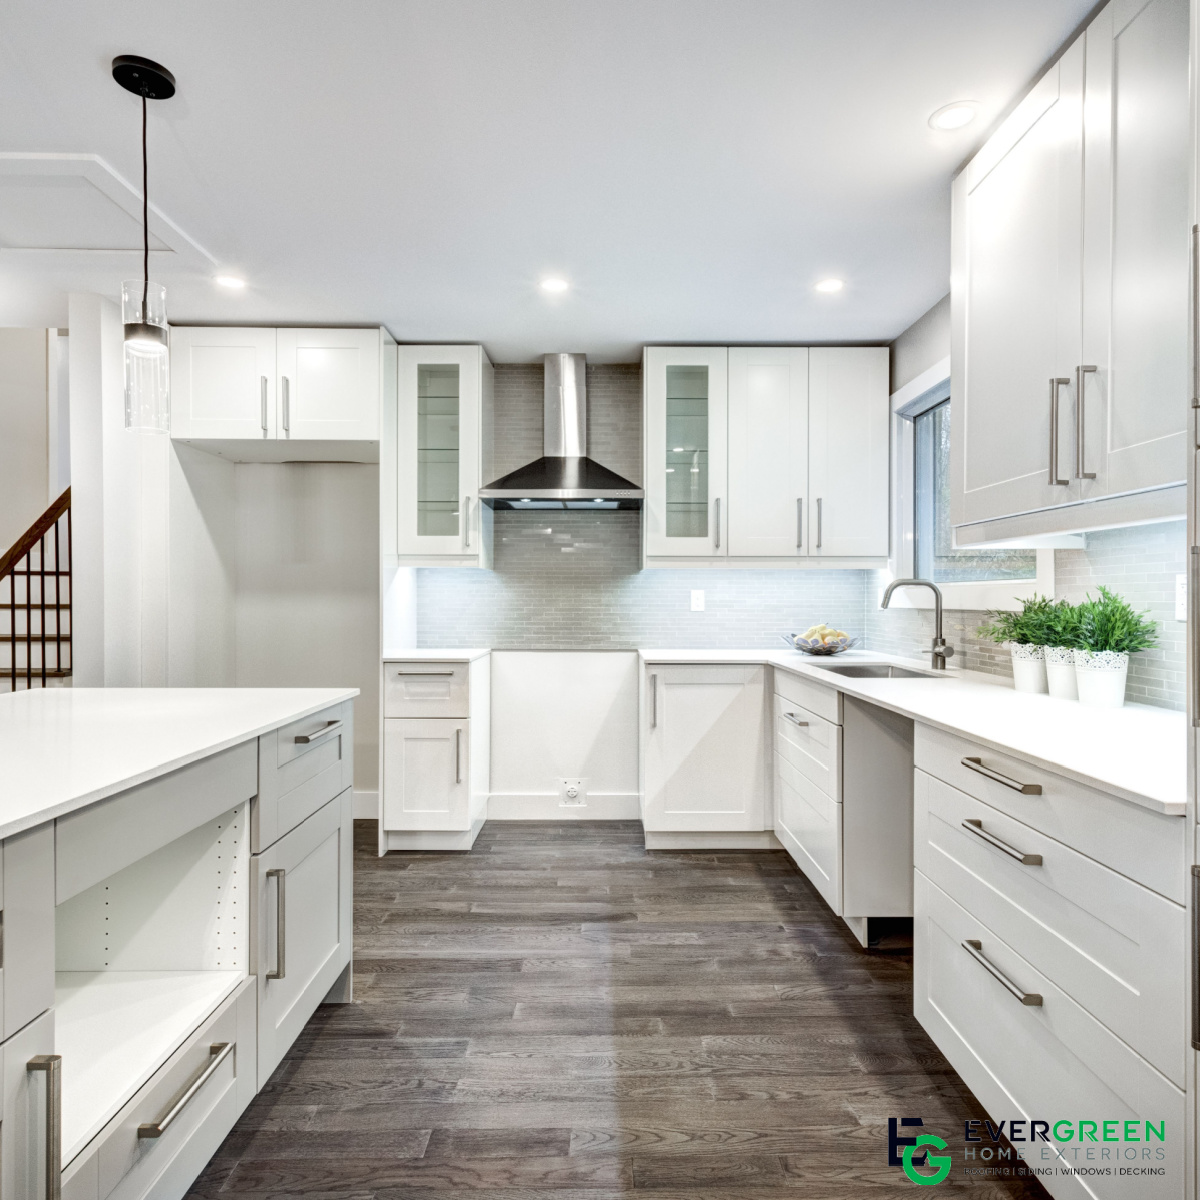 The Benefits of Working with a Professional Kitchen Remodeling Contractor